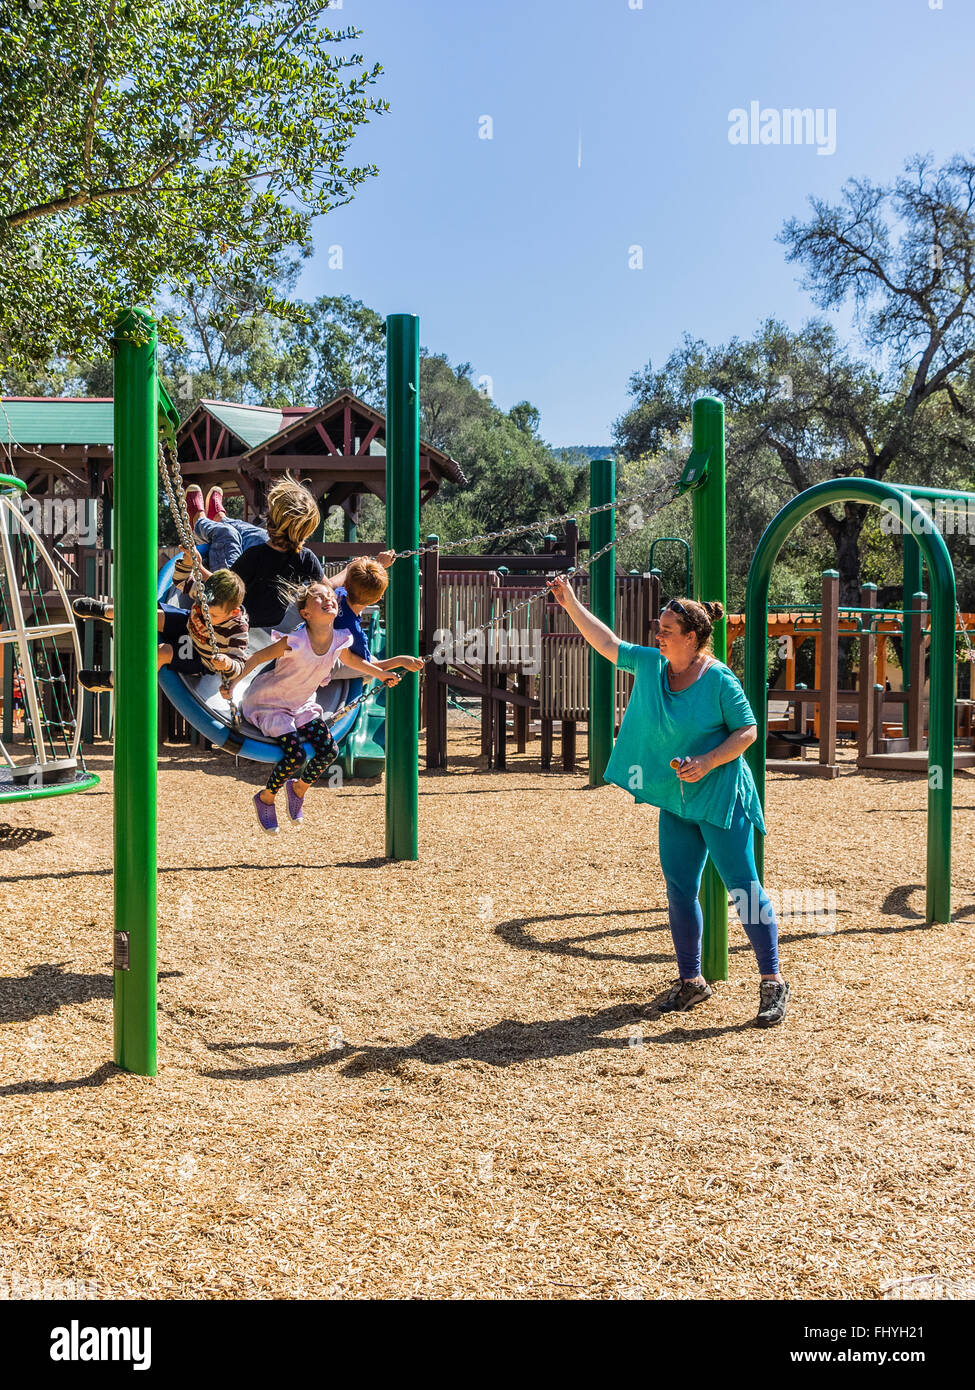 Four young kids having fun on a giant swing set that an adult female is swinging them on in Libbey Park, Ojai, California. Stock Photo